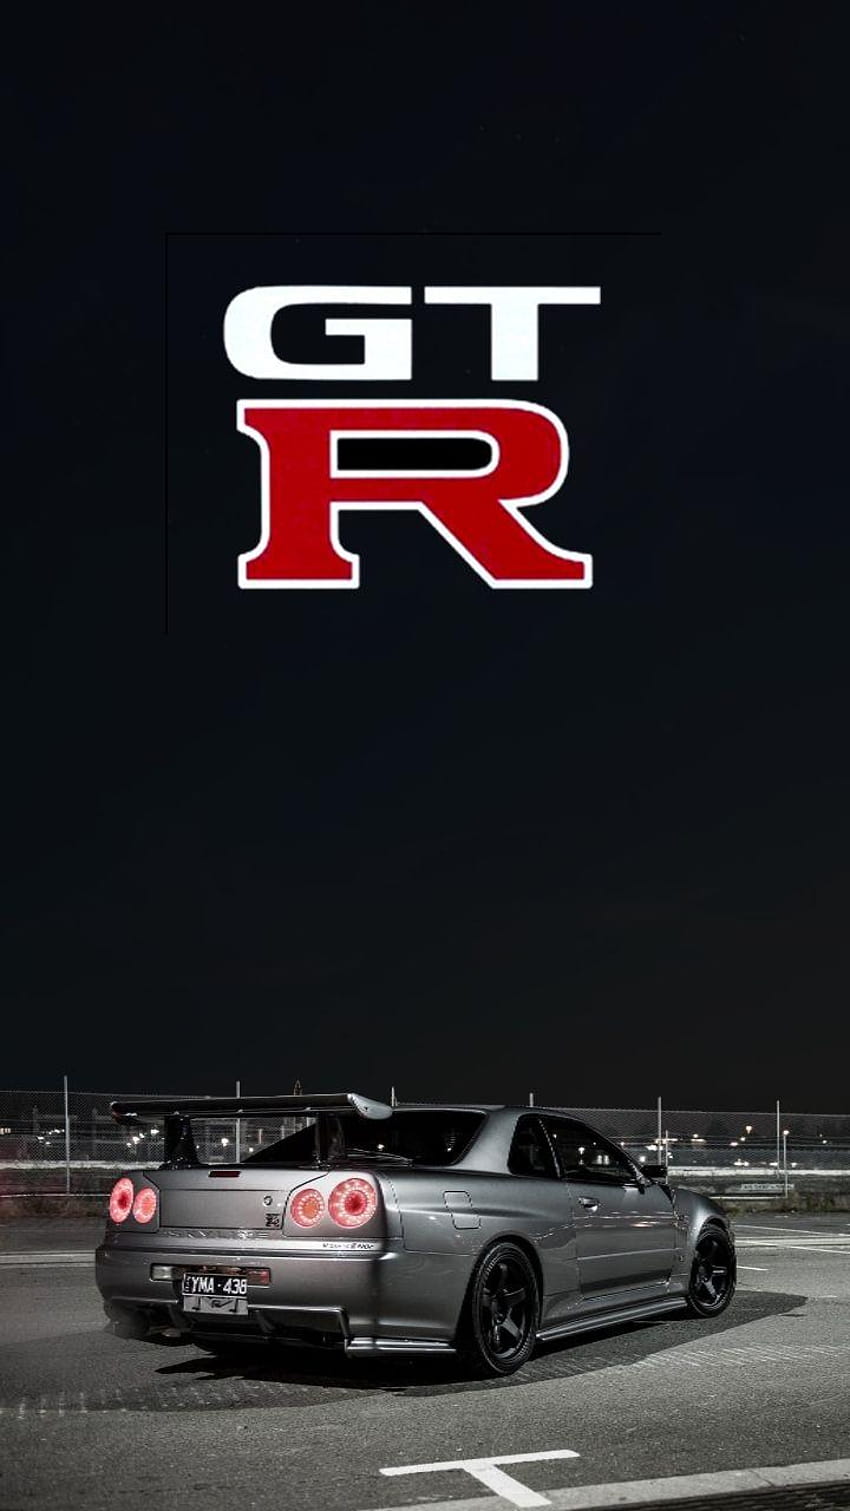 Could someone make a with skyline R34 GTR side and a grey, gtr 34 HD phone wallpaper